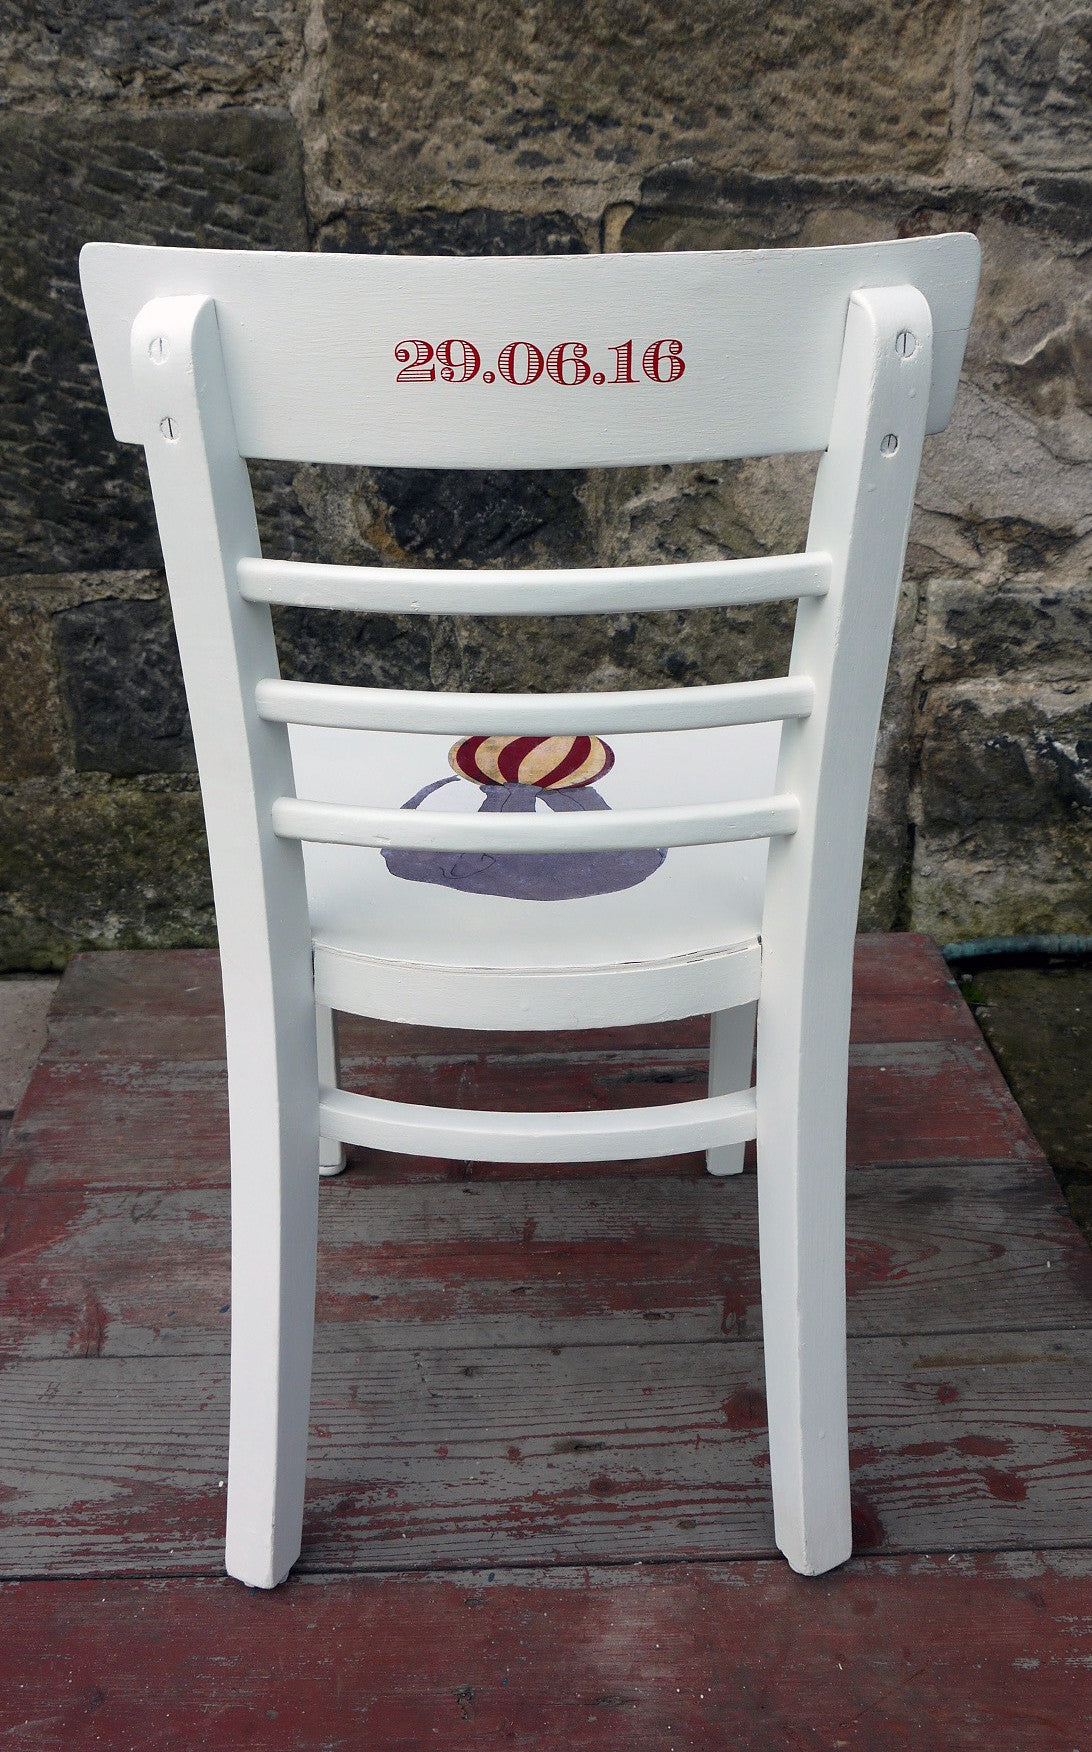 Custom Listing for Laura two personalised children's name school chairs with circus theme